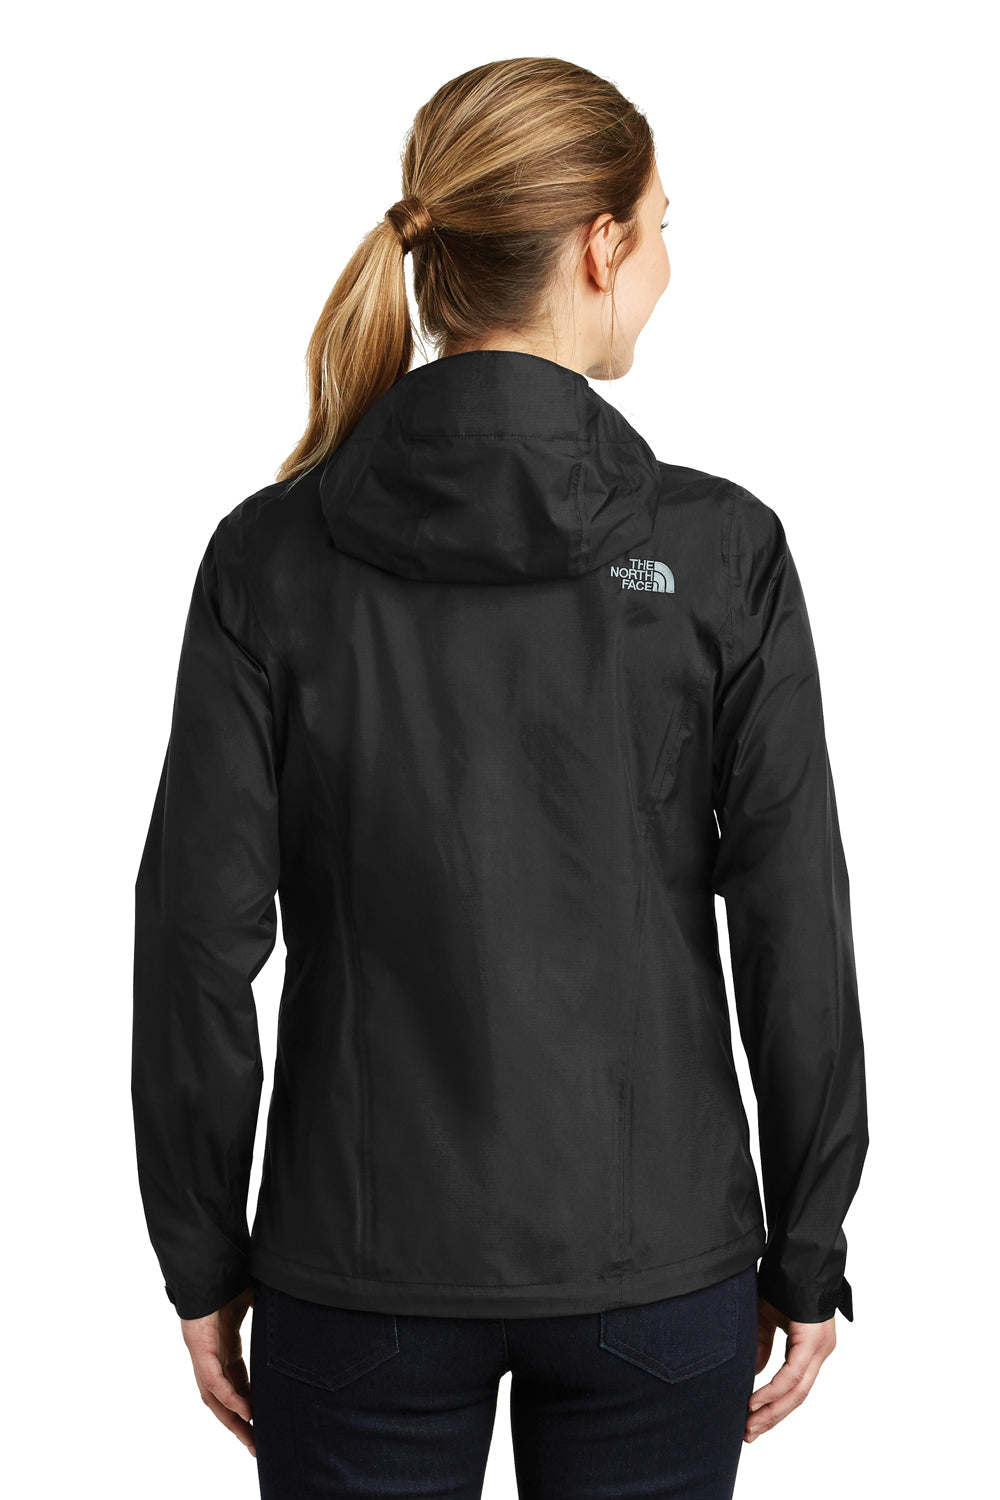 The North Face NF0A3LH5 Womens DryVent Waterproof Full Zip Hooded Jacket Black Back